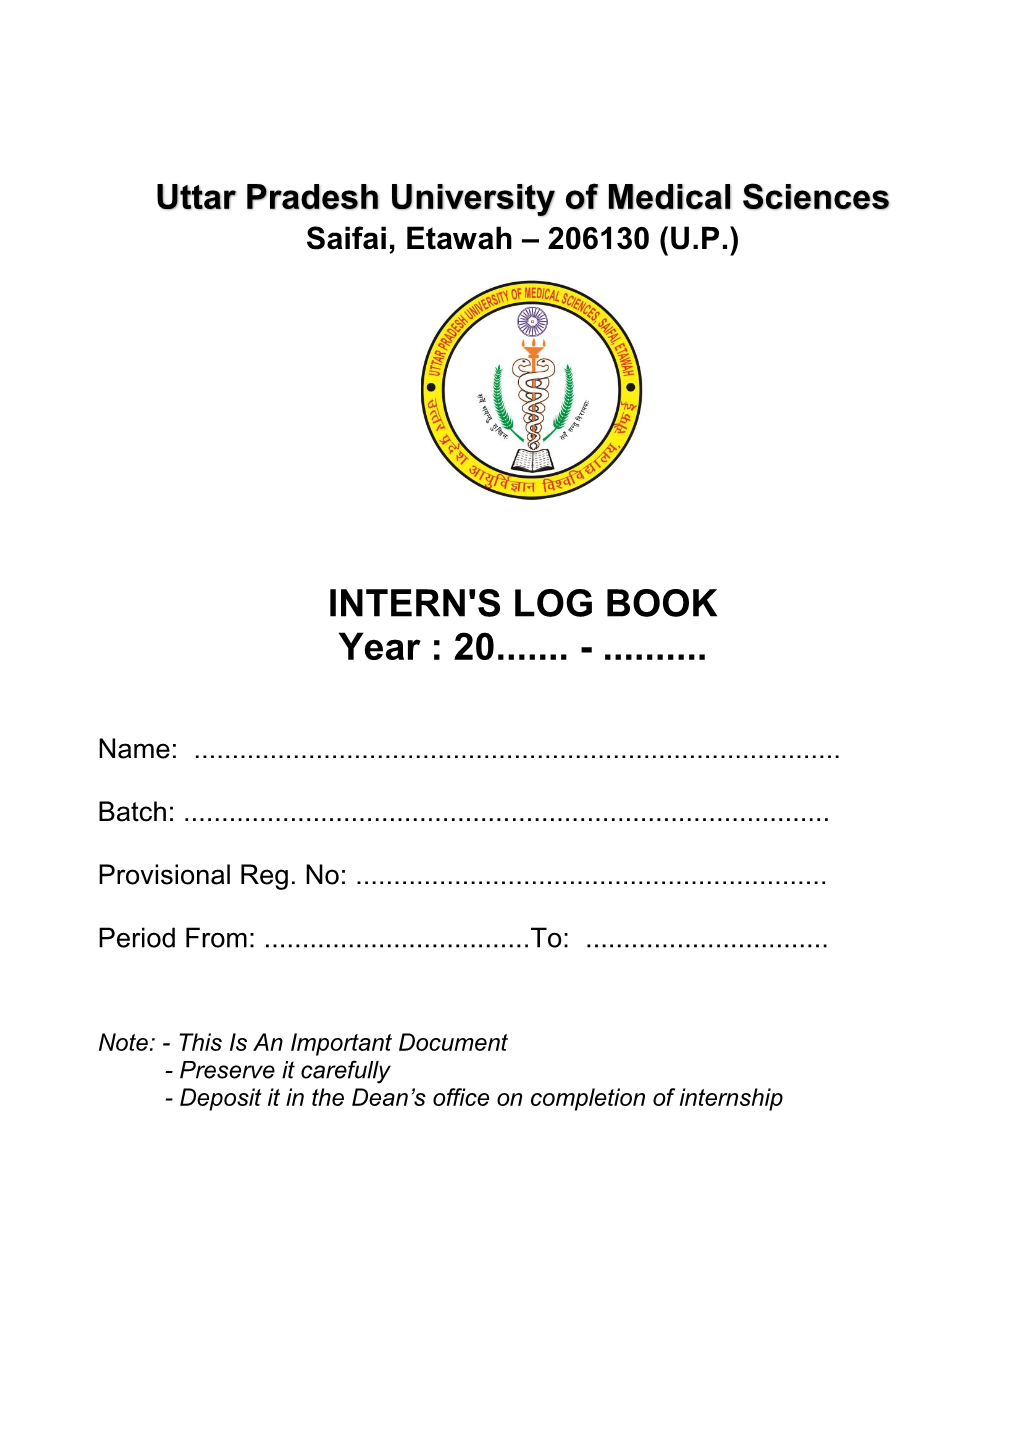 MBBS Interns Log Book Page 1 of 67